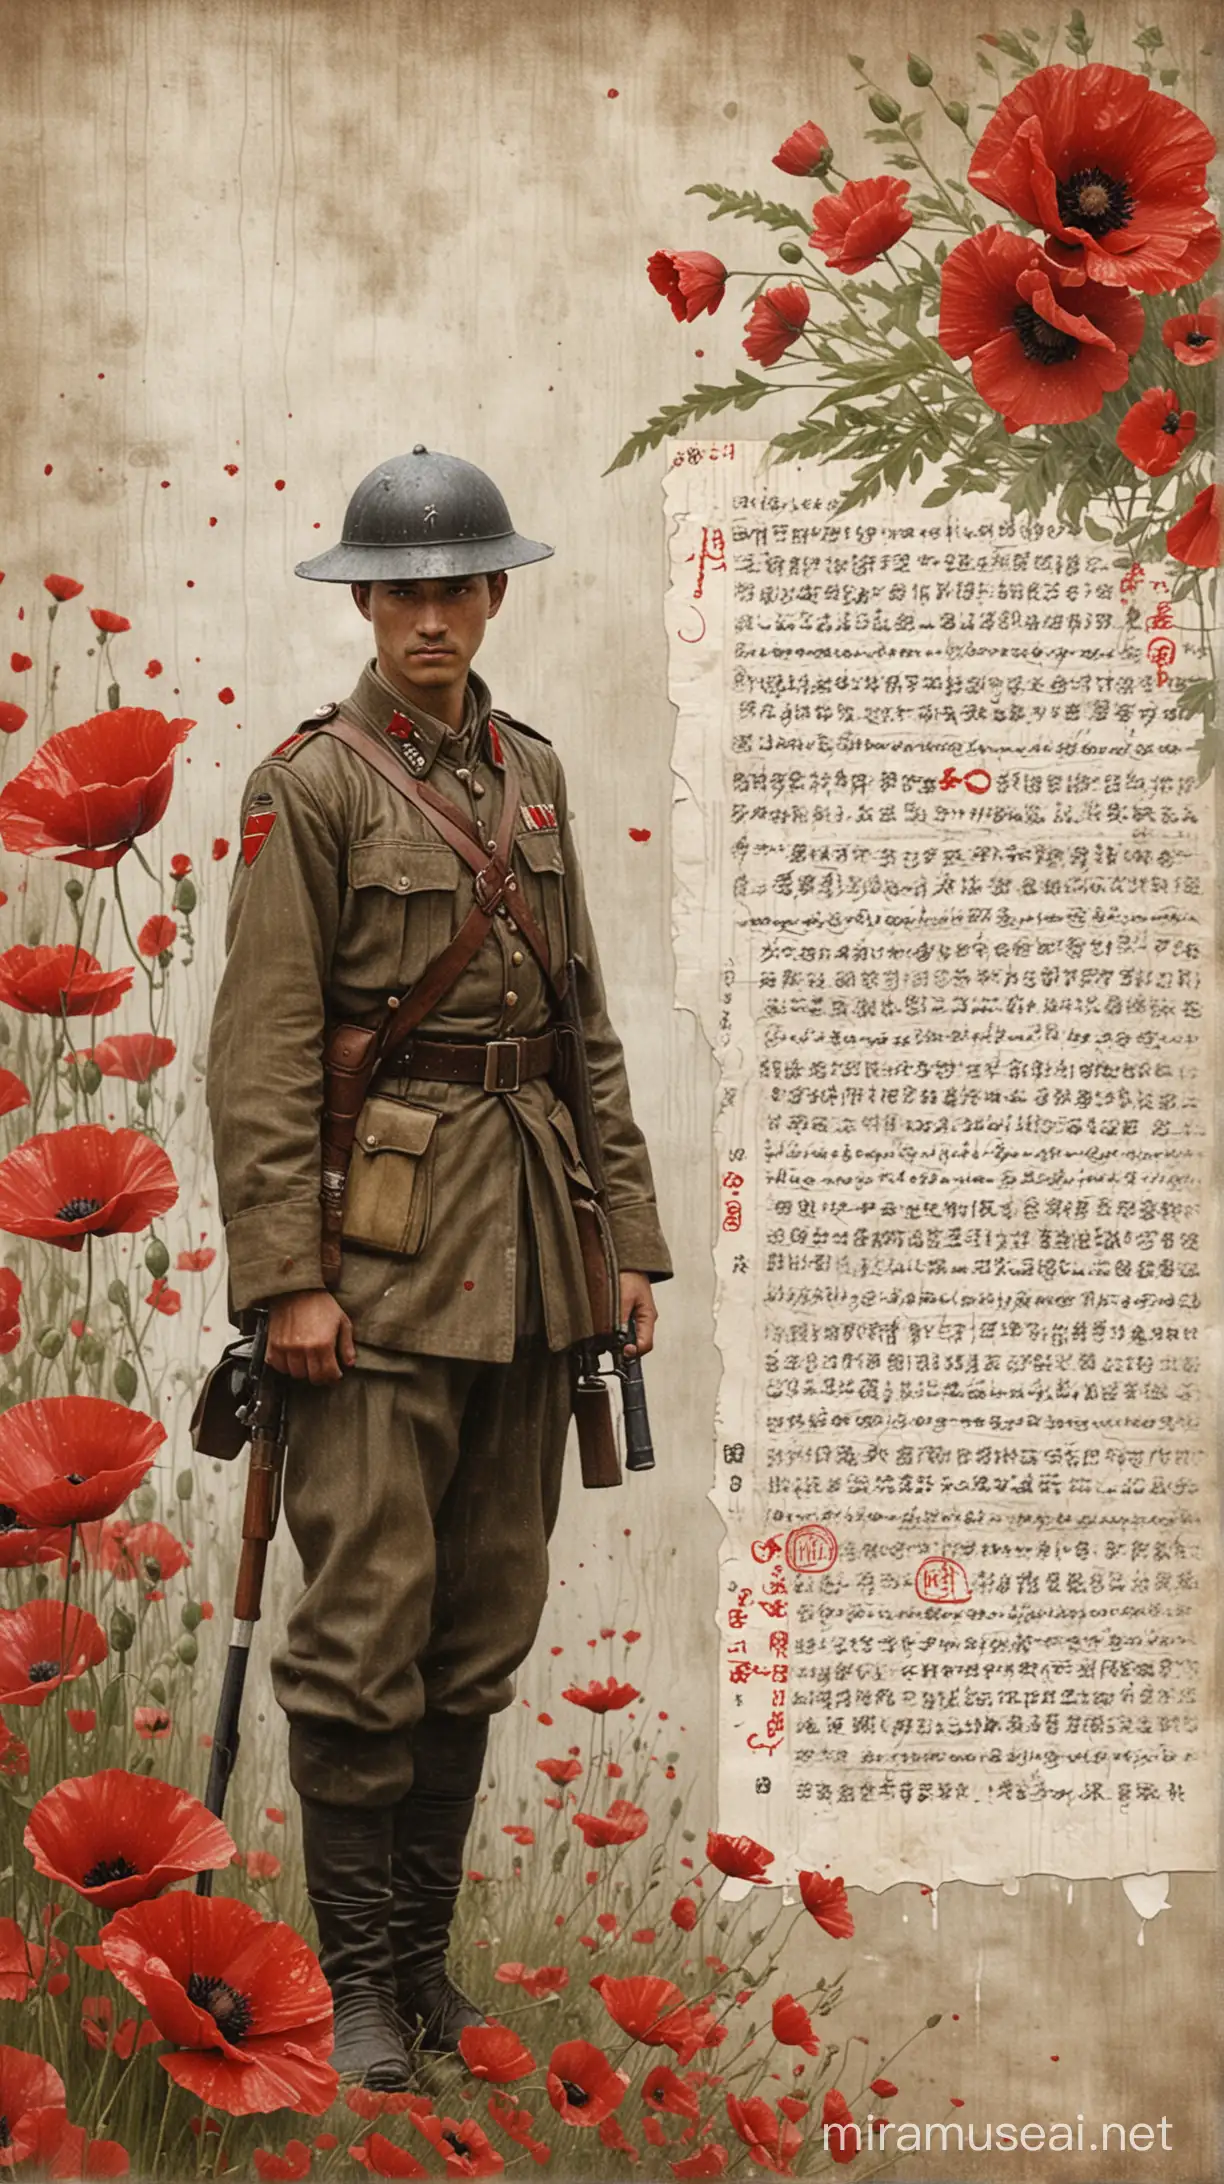 faded mixed media background that captures the essence of a rainy day with white chipped paint. It features a vintage written letter and ledger, accented with red, and includes numbers and codes for an added layer of intrigue. an ANZAC soldier stands still, adding a solemn touch, while poppies flow diagonally through the image, rendered in a Japanese style.